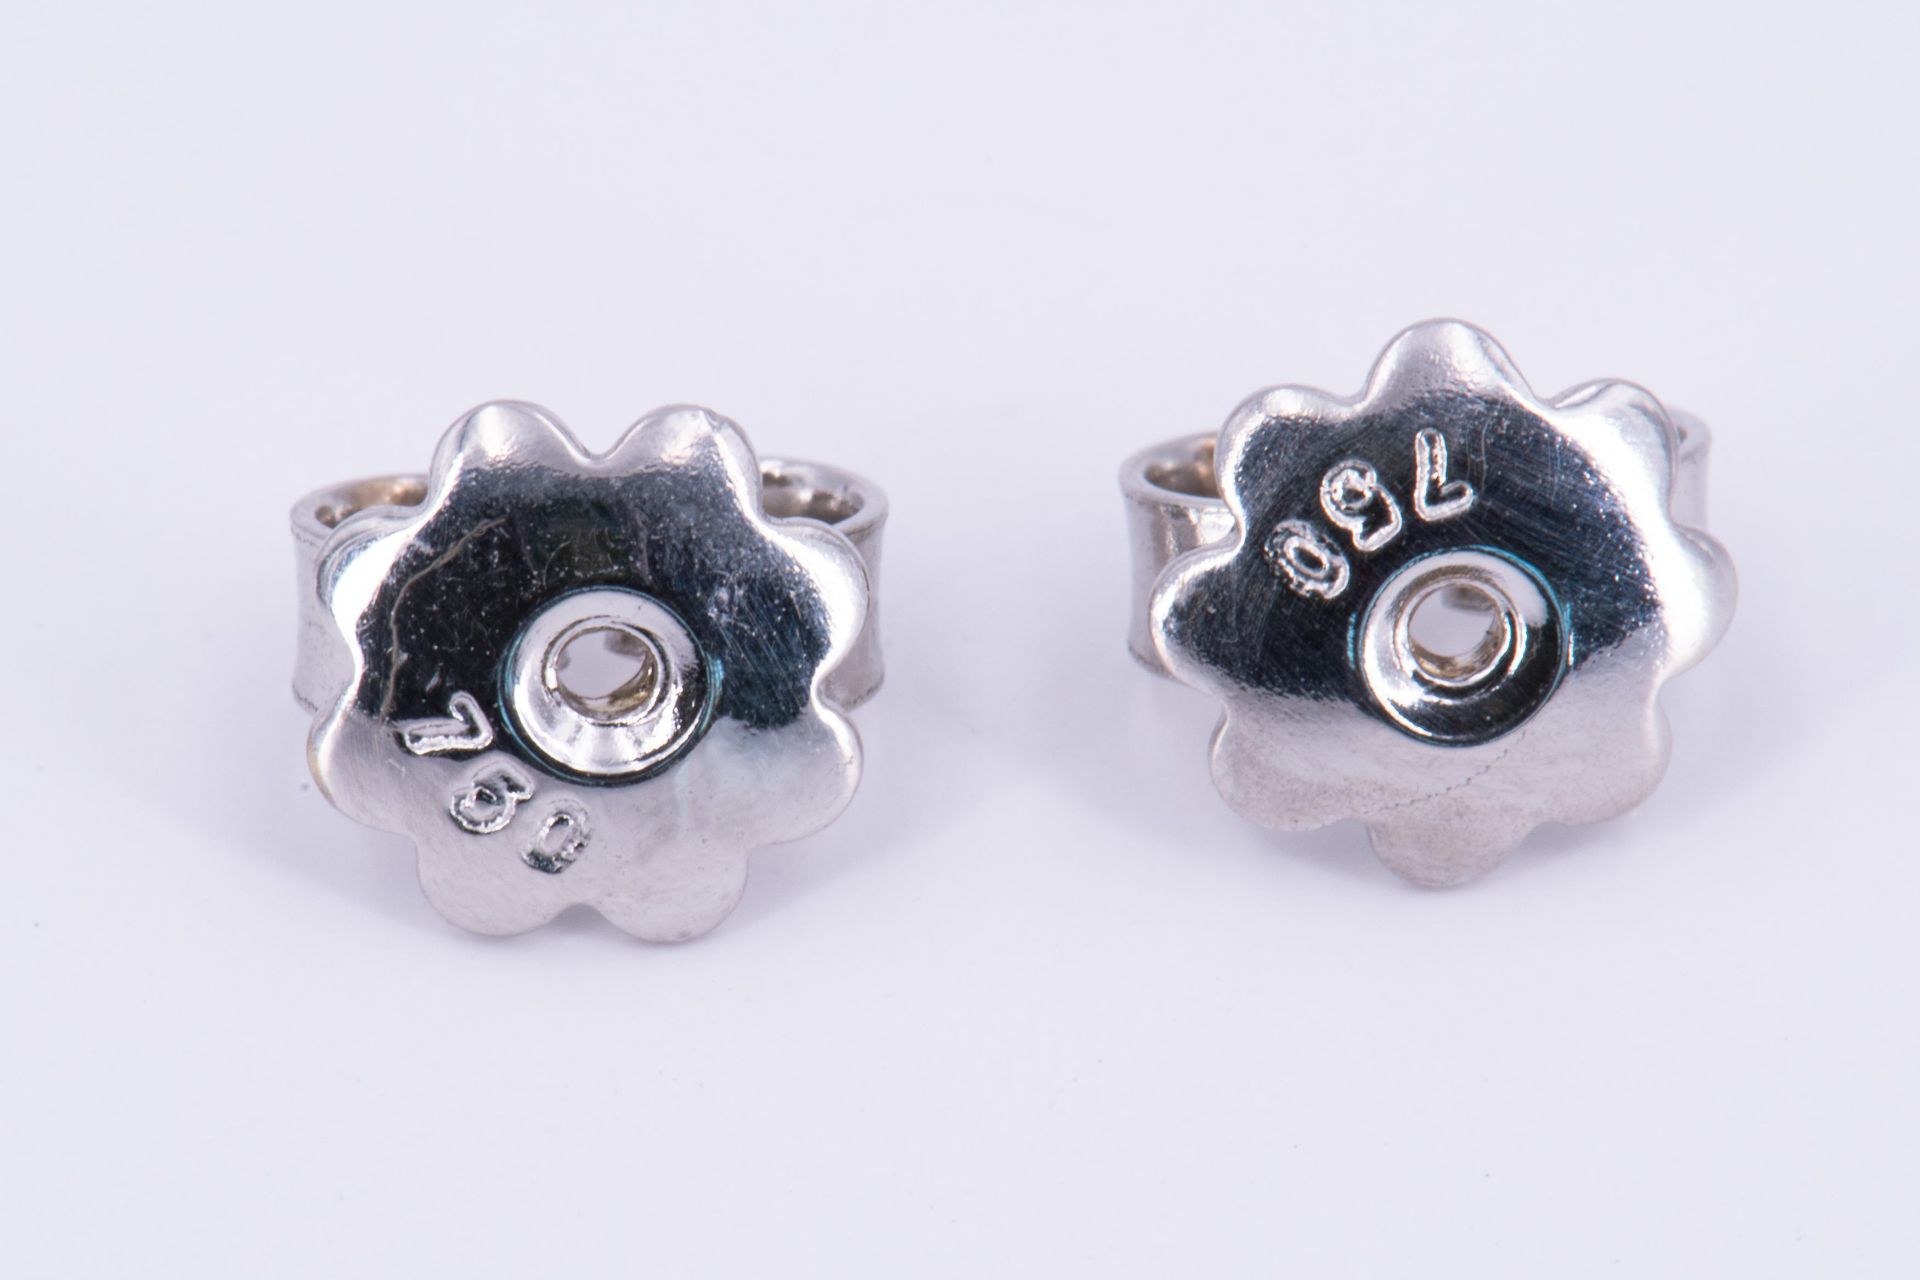 Solitaire Stud Earrings - Image 3 of 3